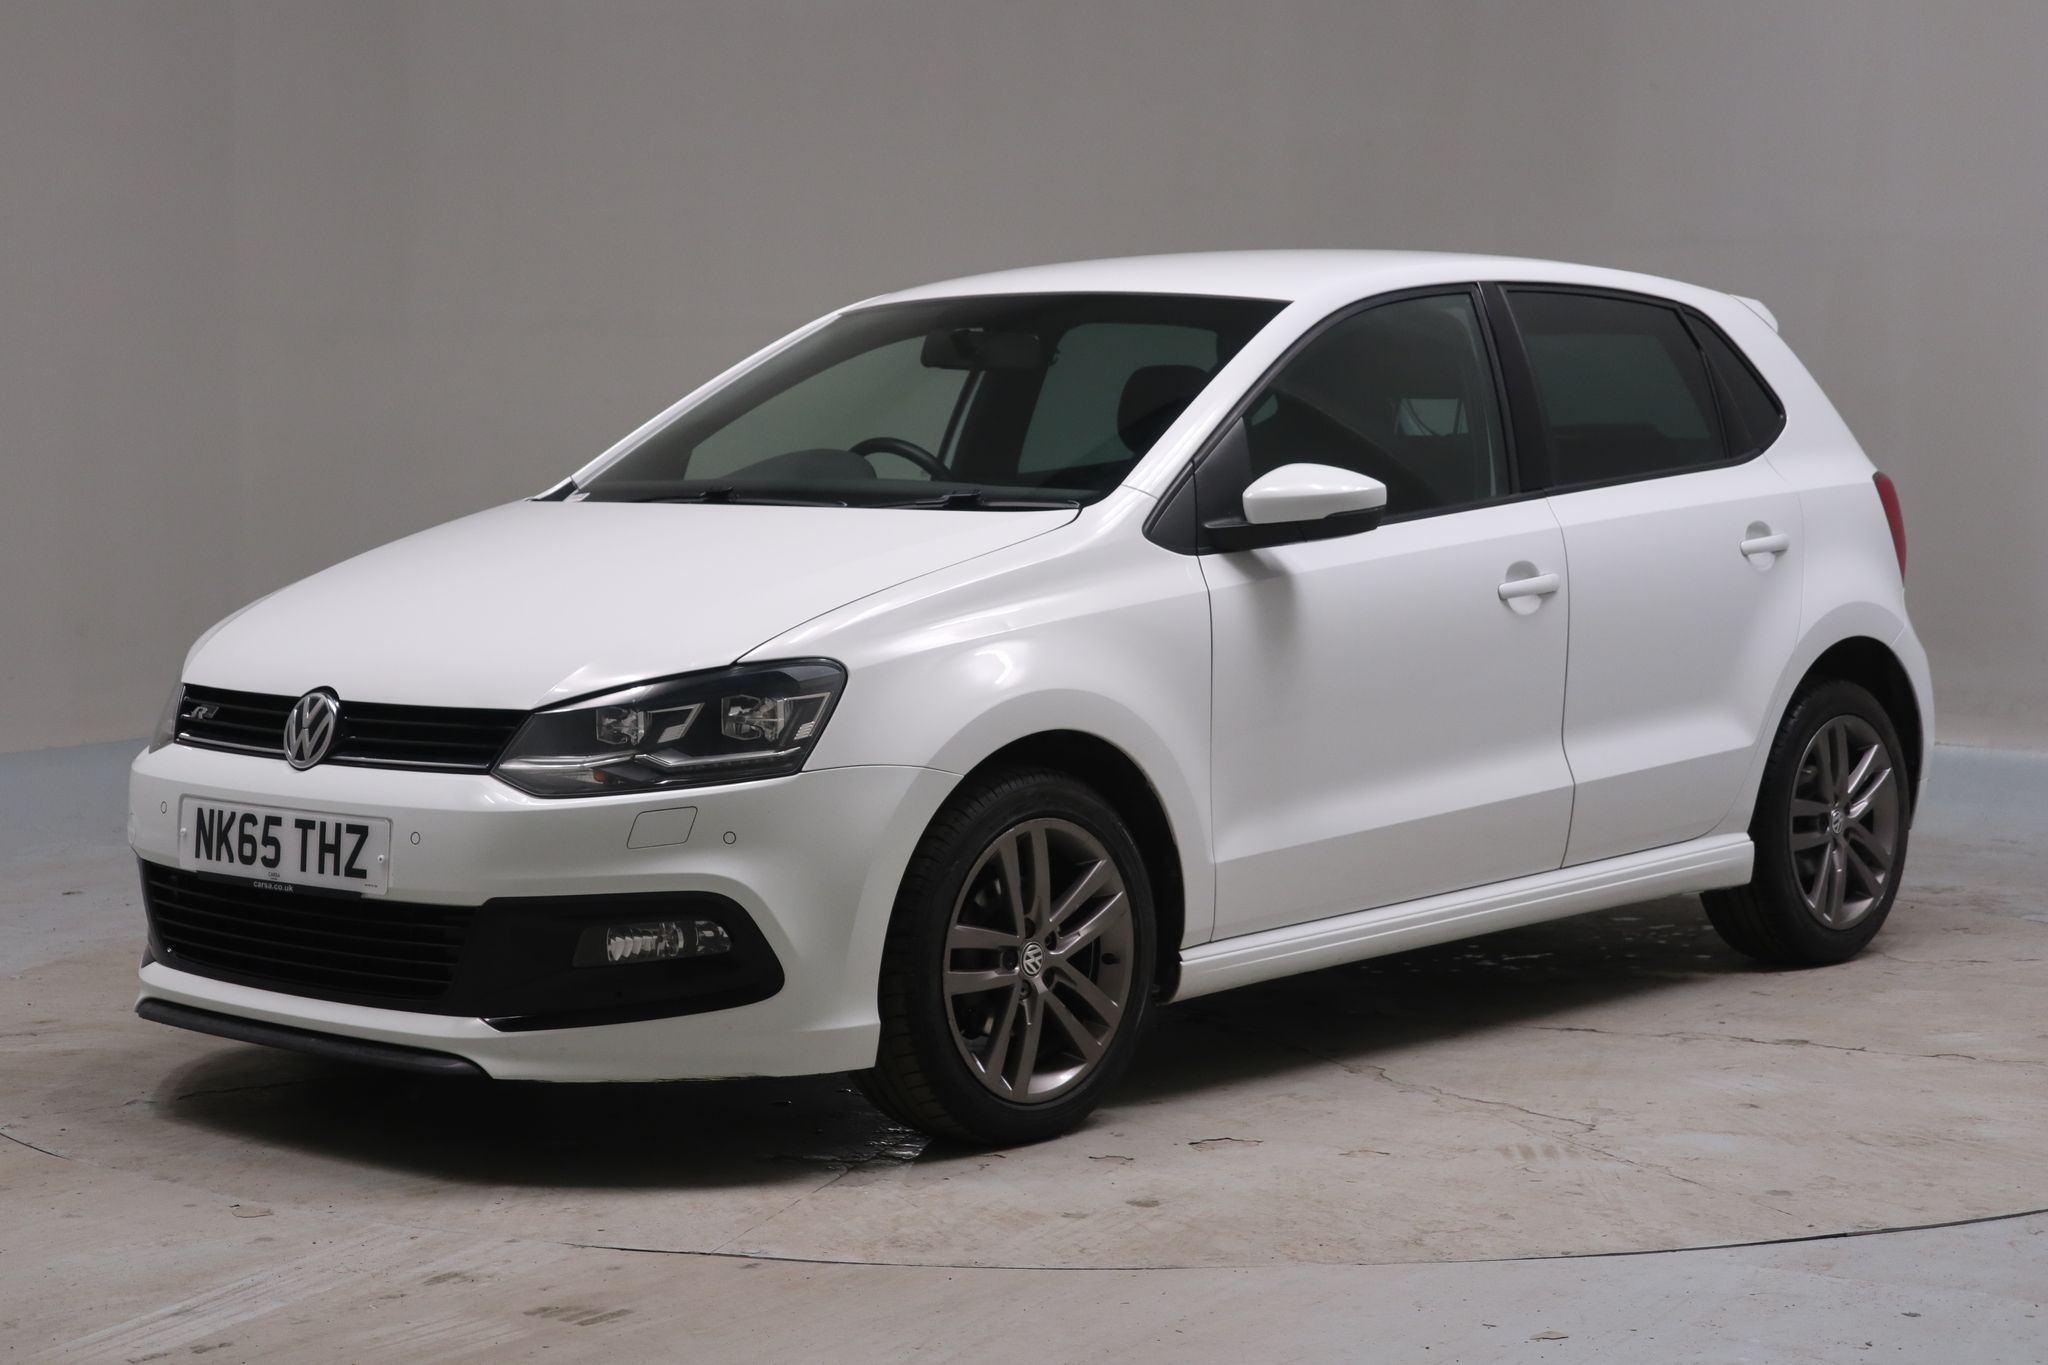 2015 used Volkswagen Polo 1.2 TSI BlueMotion Tech R-Line (90 ps)